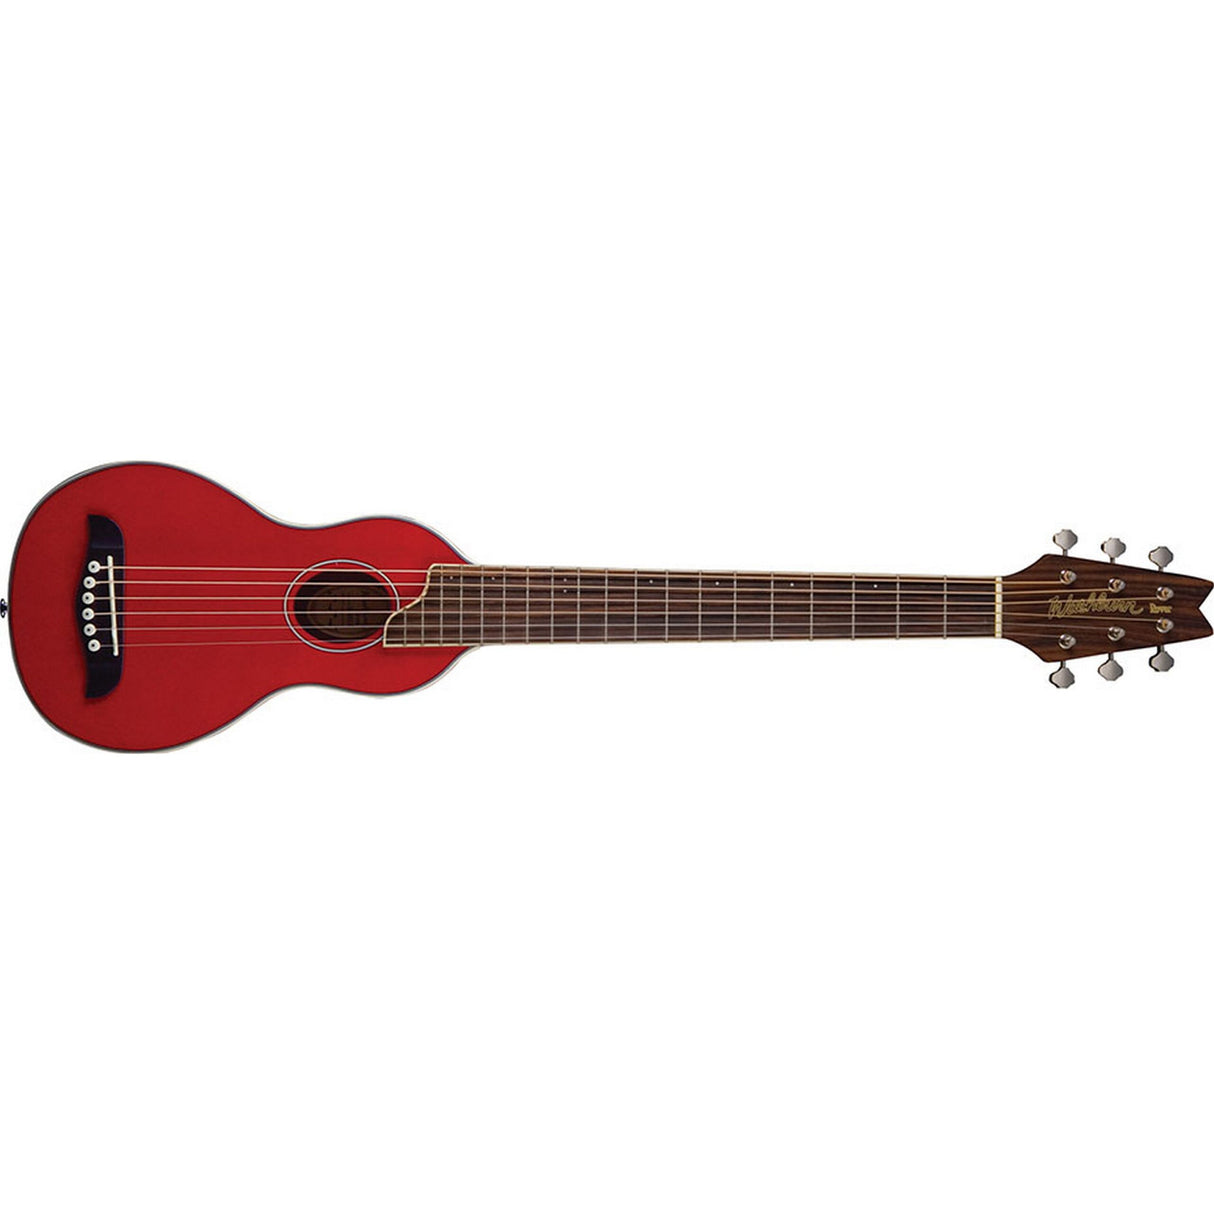 Washburn RO10STRK-A Rover Solid Spruce Mahogany Travel Guitar, Trans Red